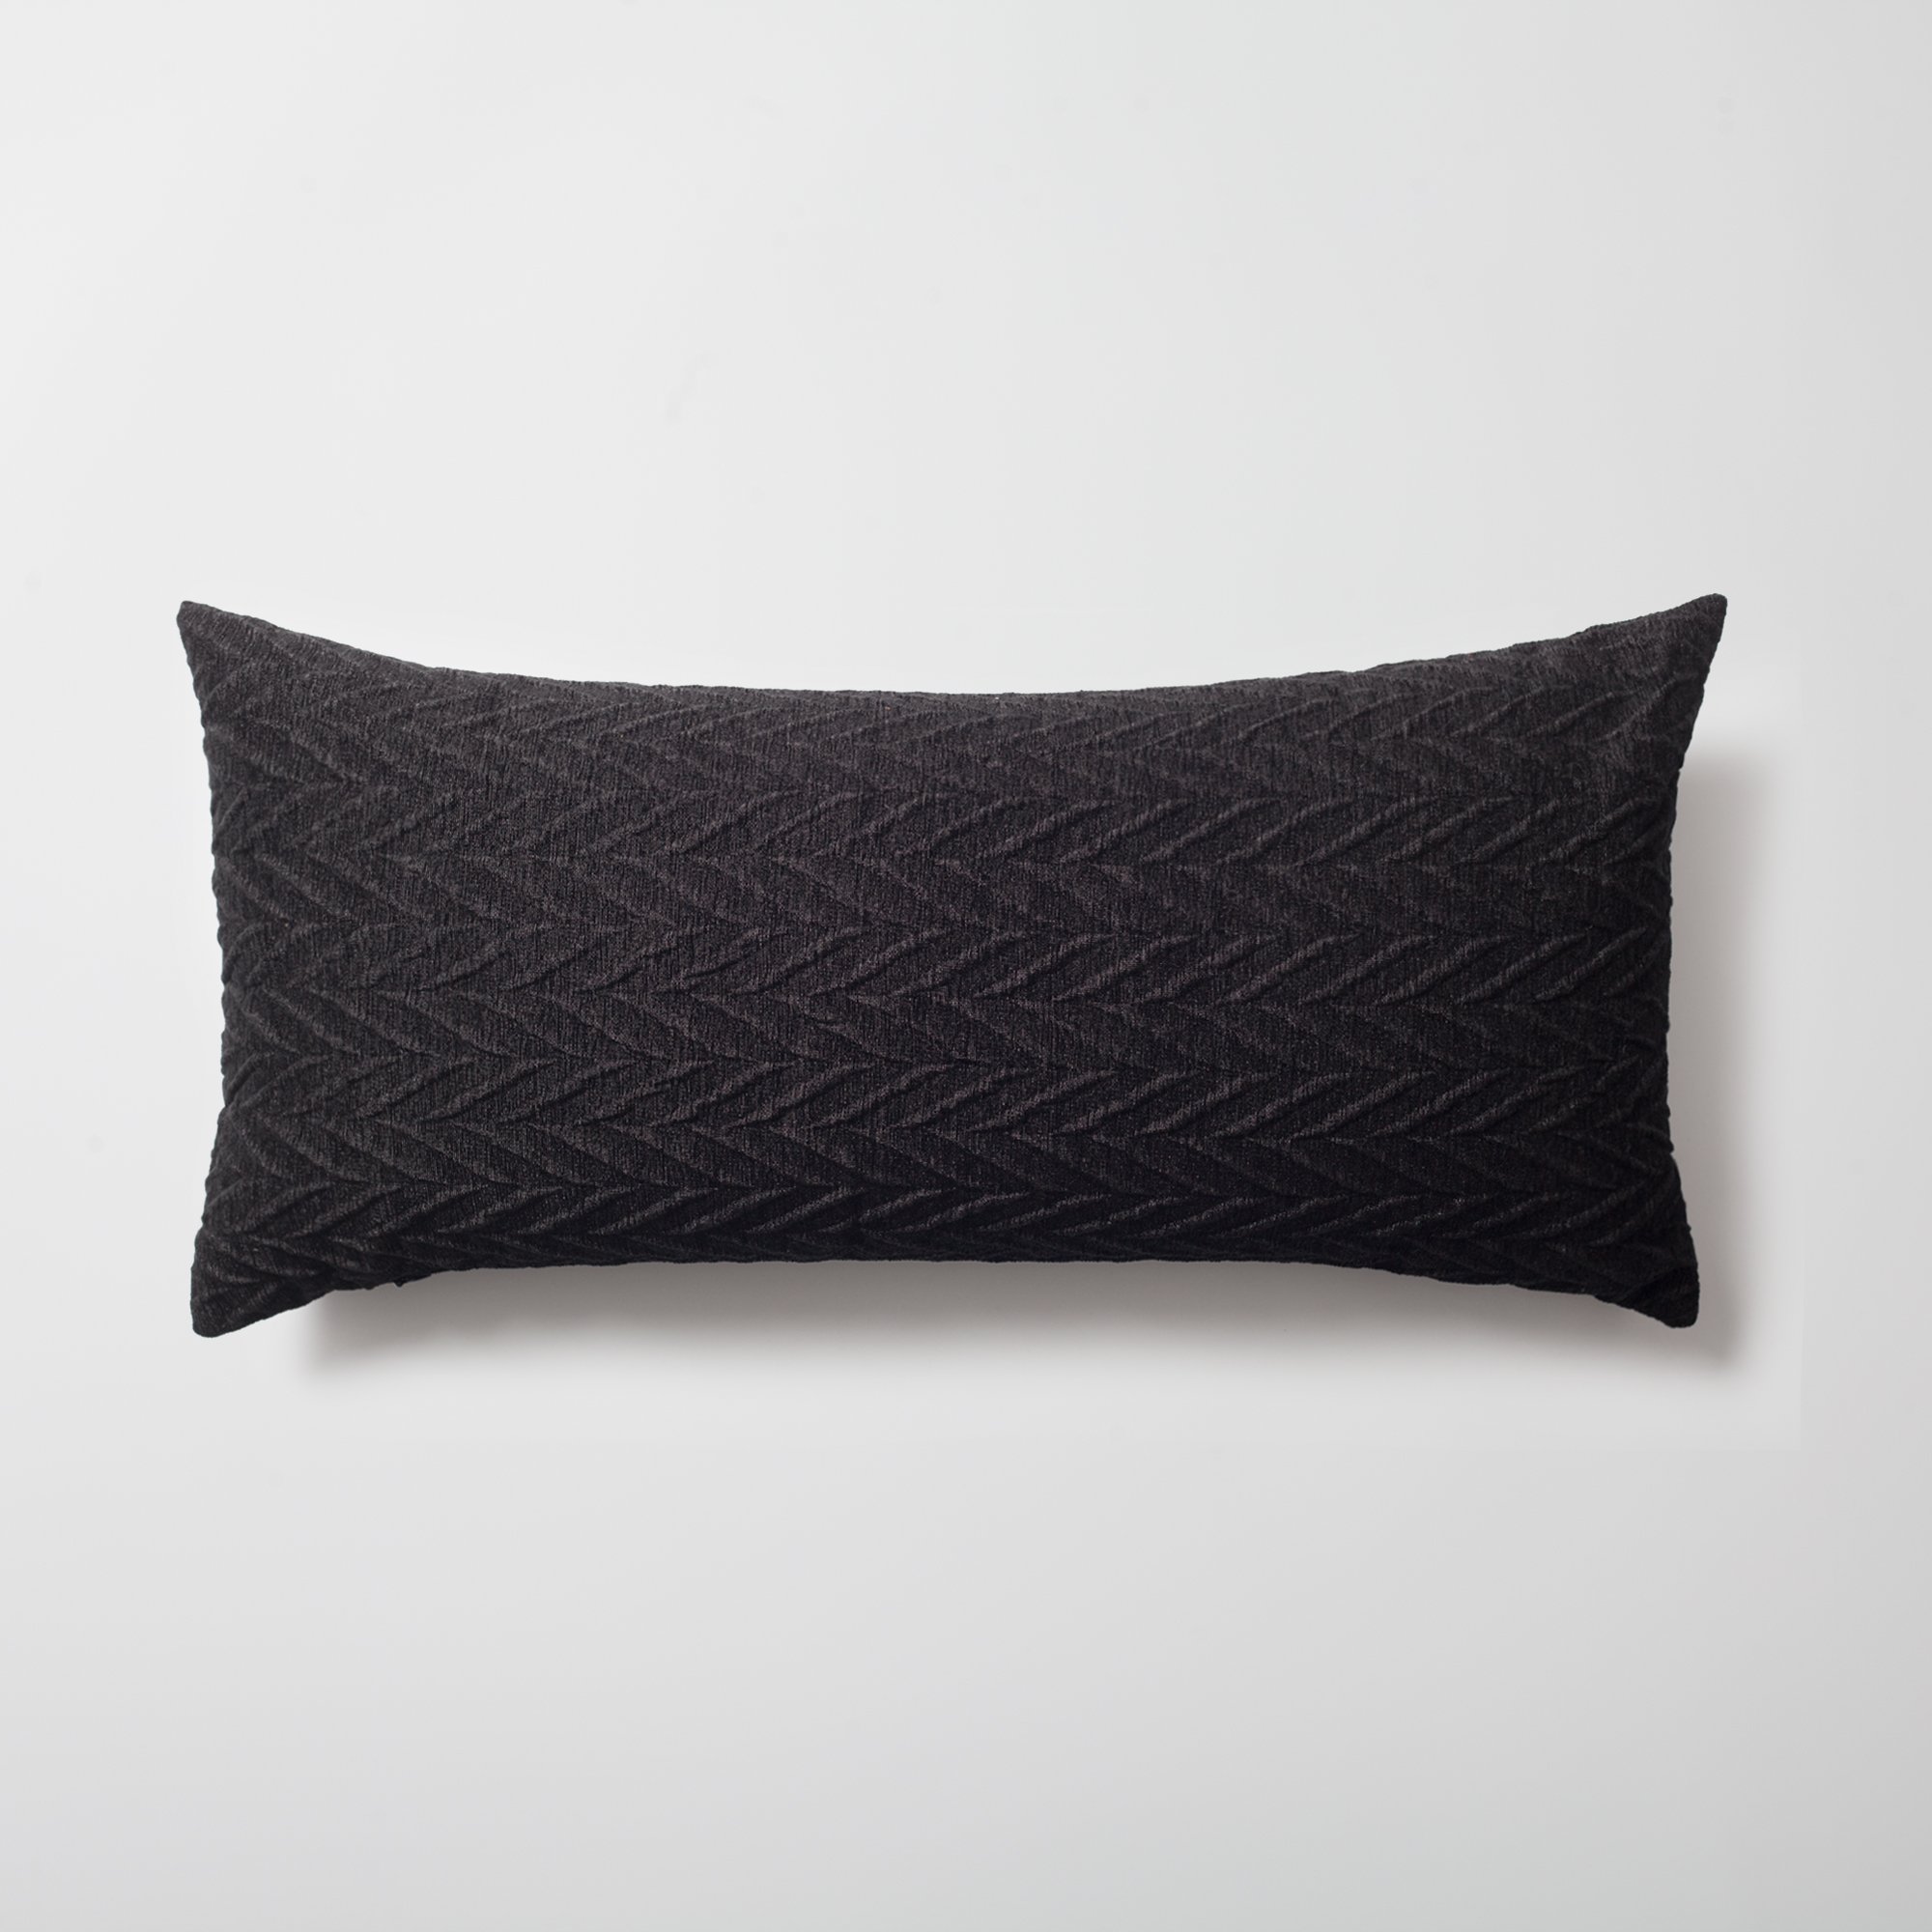 "Cello" - Embossed Pattern Cushion 14x28 Inch - Black (Cover Only)